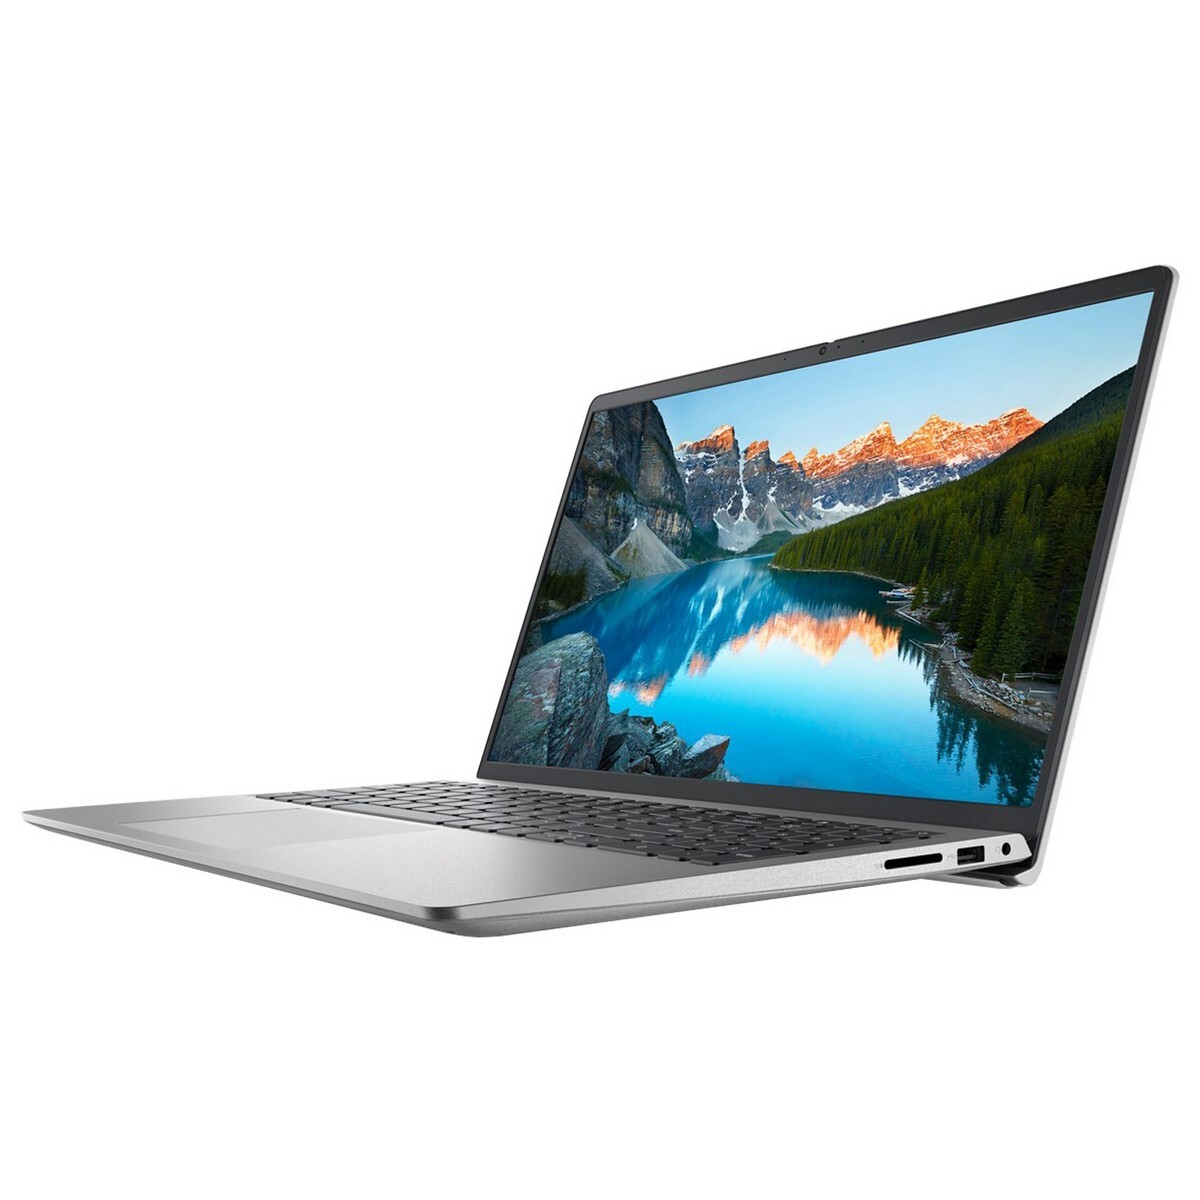 DELL Inspiron 15 3530 Core i5 13th Gen - (8 GB/1 TB SSD/Windows 11 Home) IN3530RW8JY001ORS1 Laptop , Platinum Silver